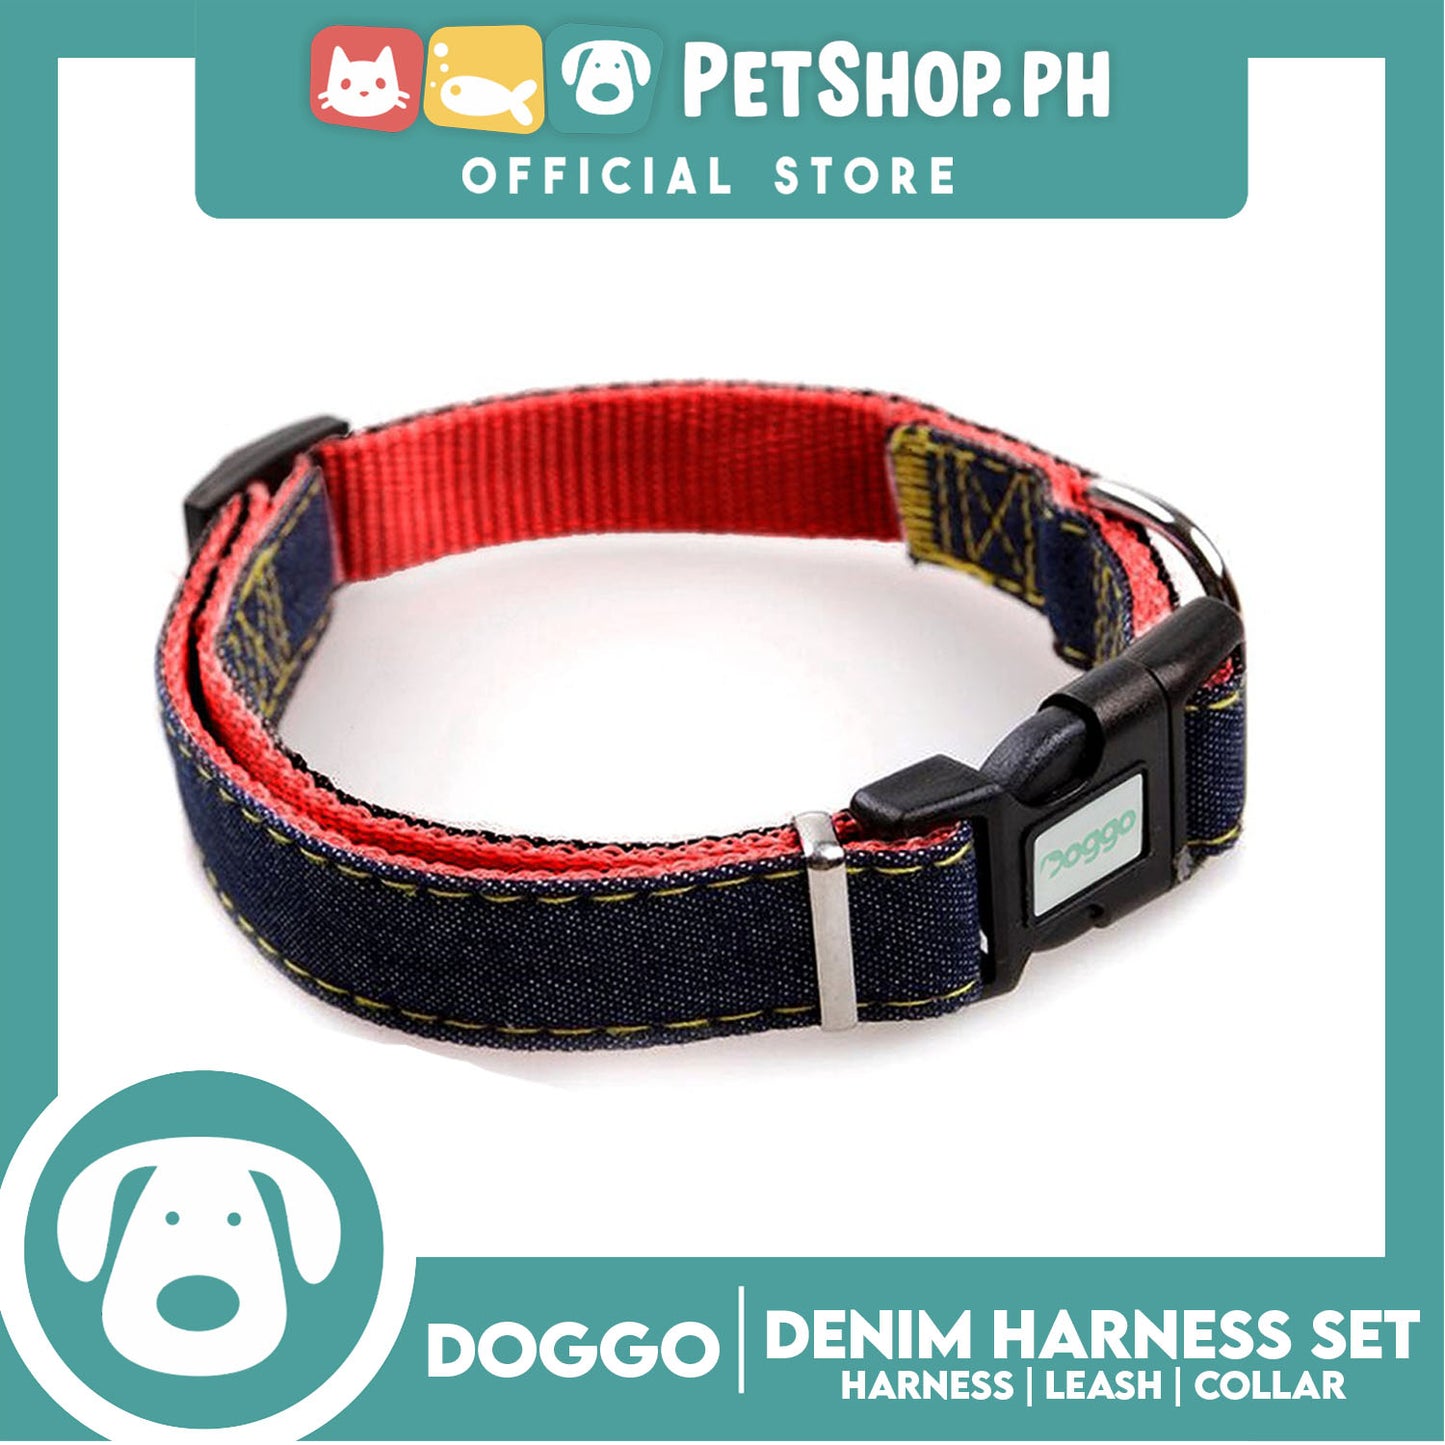 Doggo Strong Harness Set Denim Design Extra Small (Blue) Harness, Leash and Collar for Your Dog